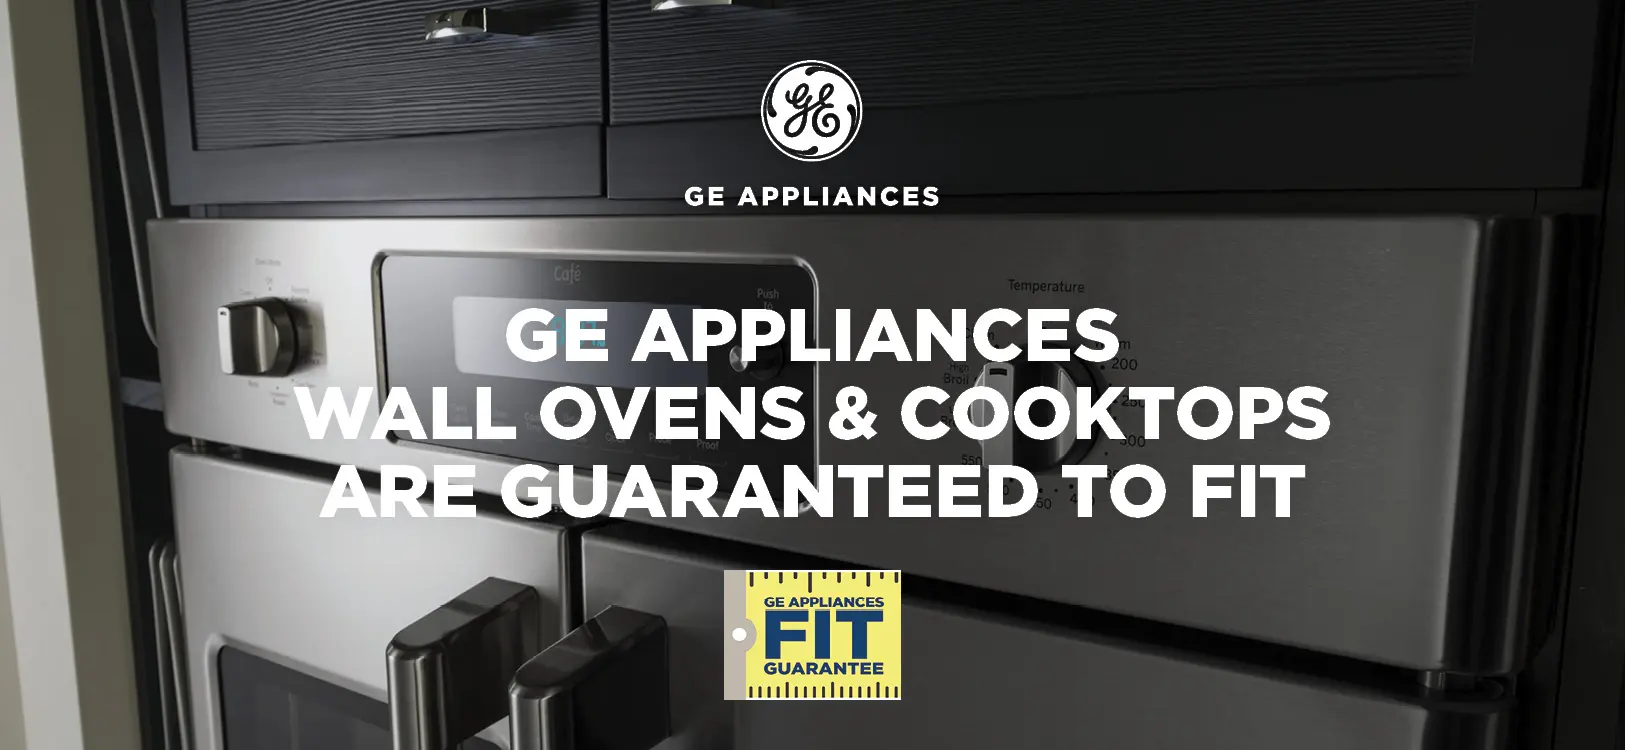 Get your FIT gaurantee with your Cafe GE wall oven or cook top purchase